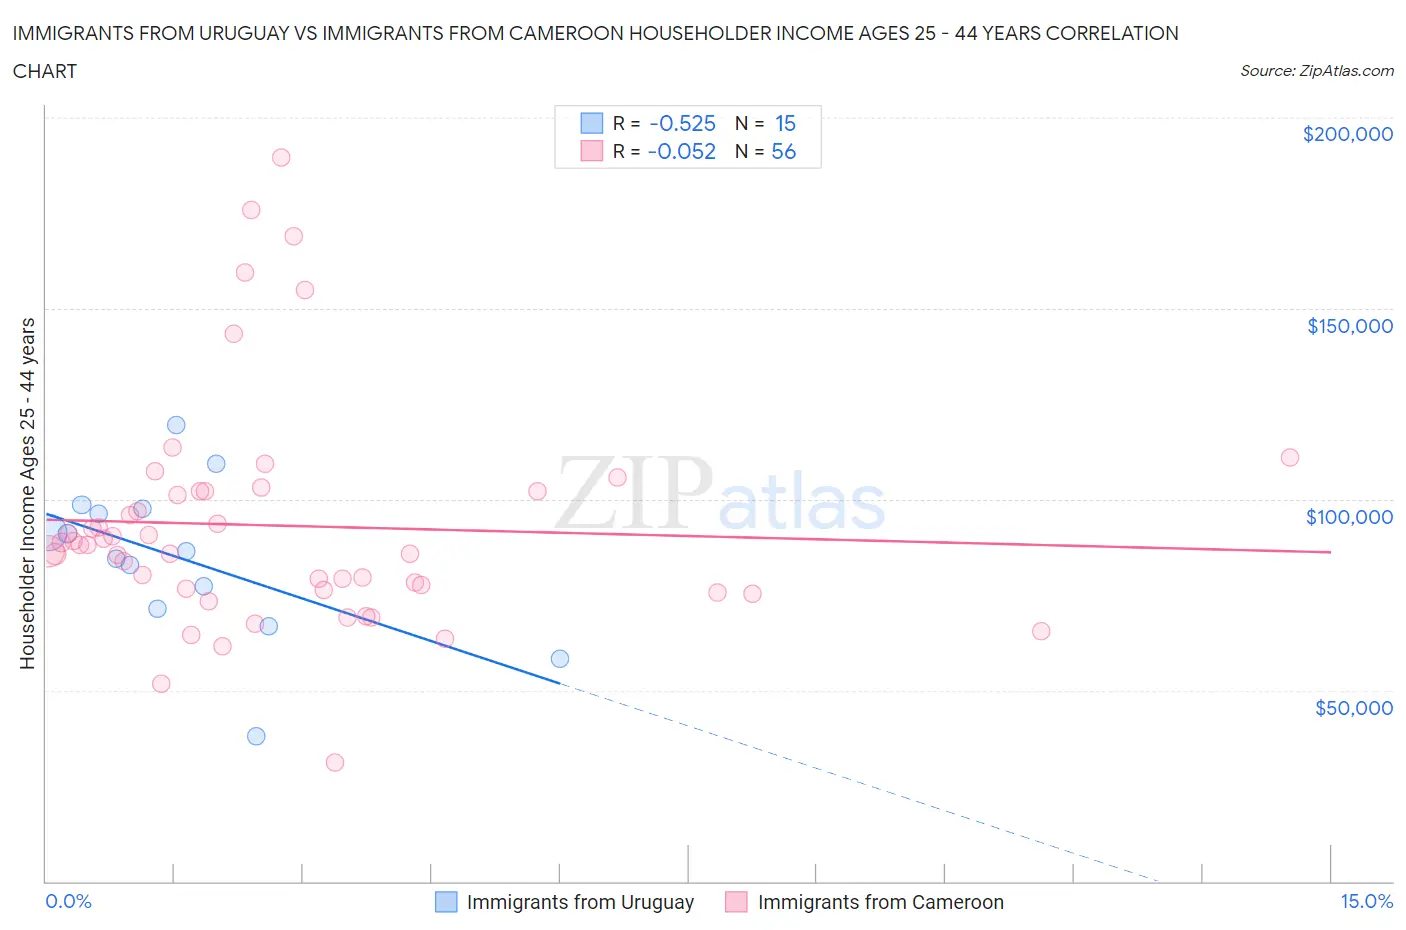 Immigrants from Uruguay vs Immigrants from Cameroon Householder Income Ages 25 - 44 years